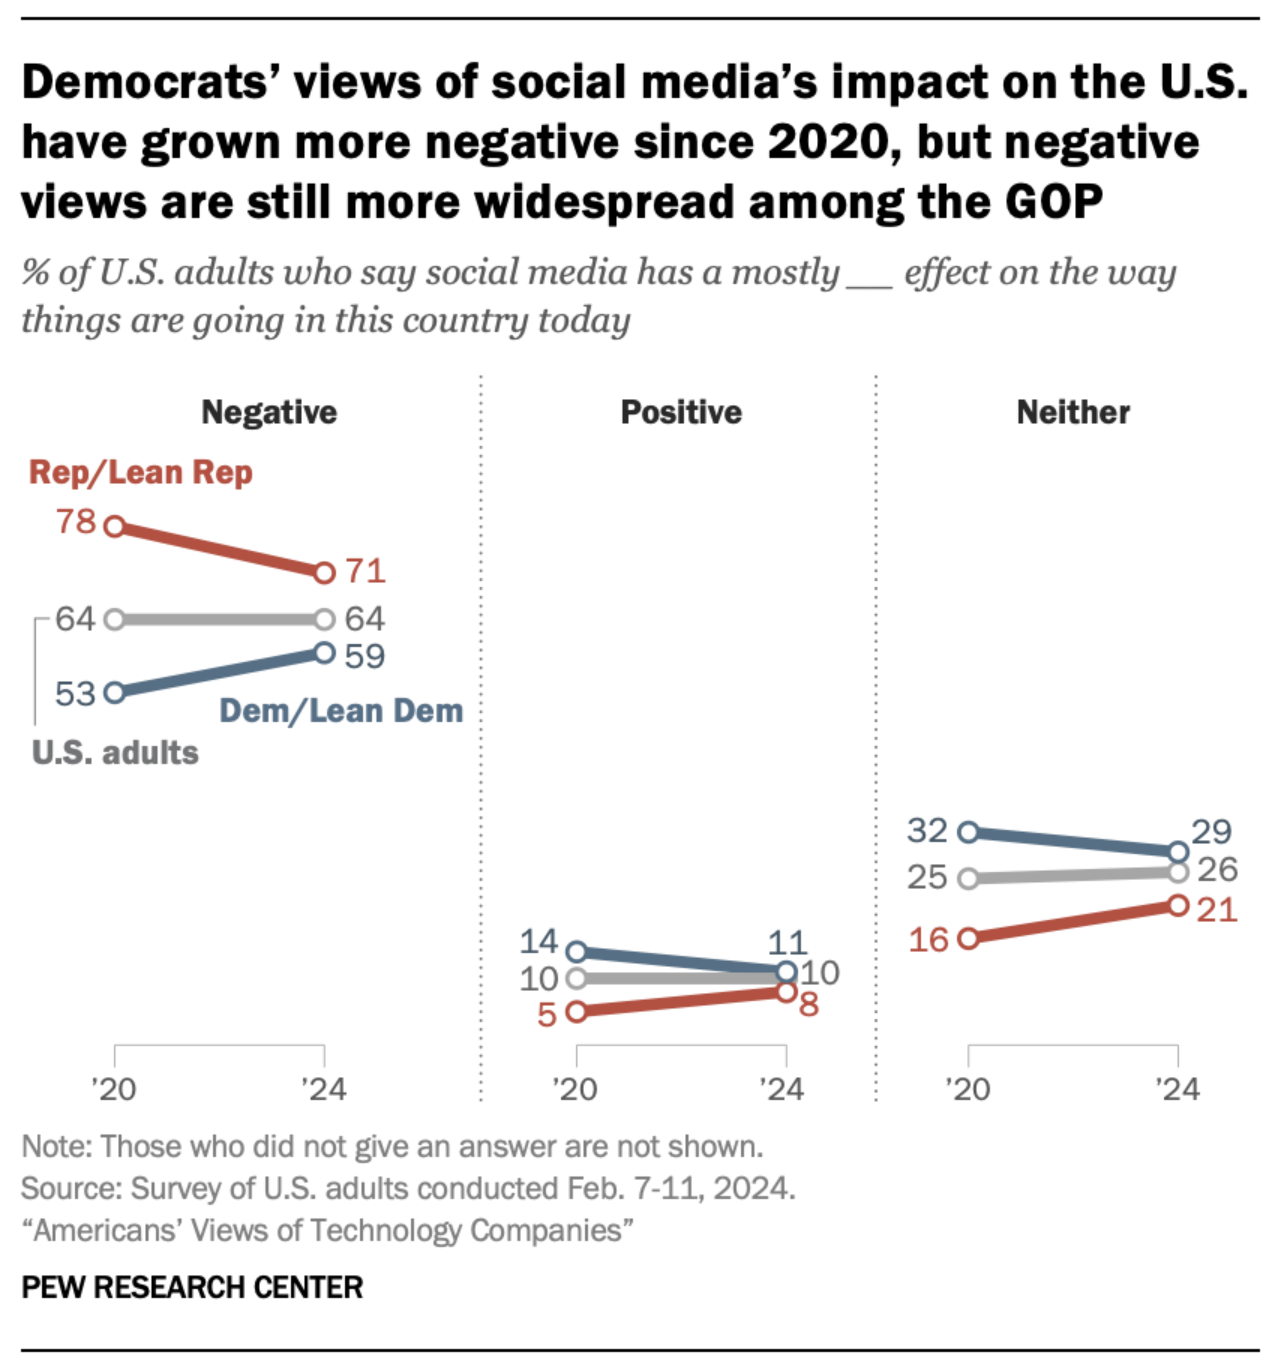 The Pew Research Center has found that Democrats' view of social media's impact on the U.S. has become more negative since 2020, but negative views are still more widespread among the Republican Party